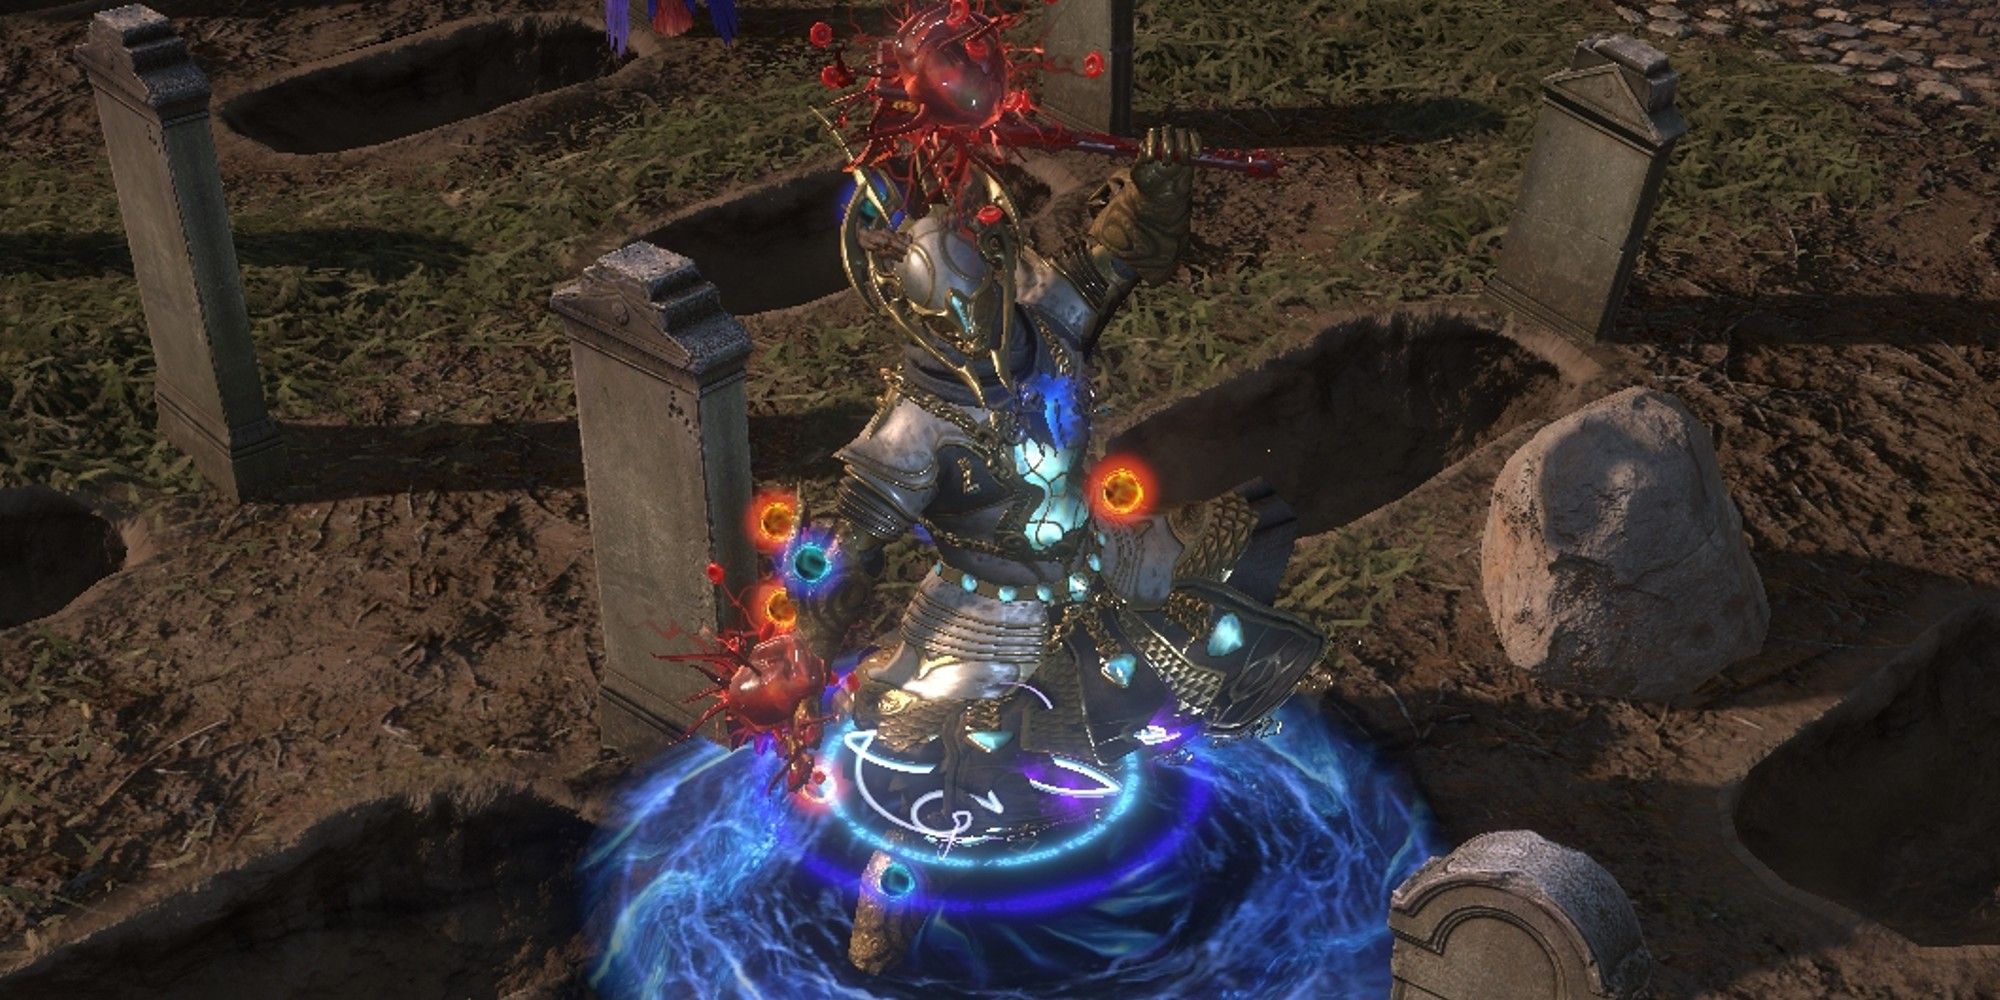 Posing in the Necropolis graveyard in Path of Exile